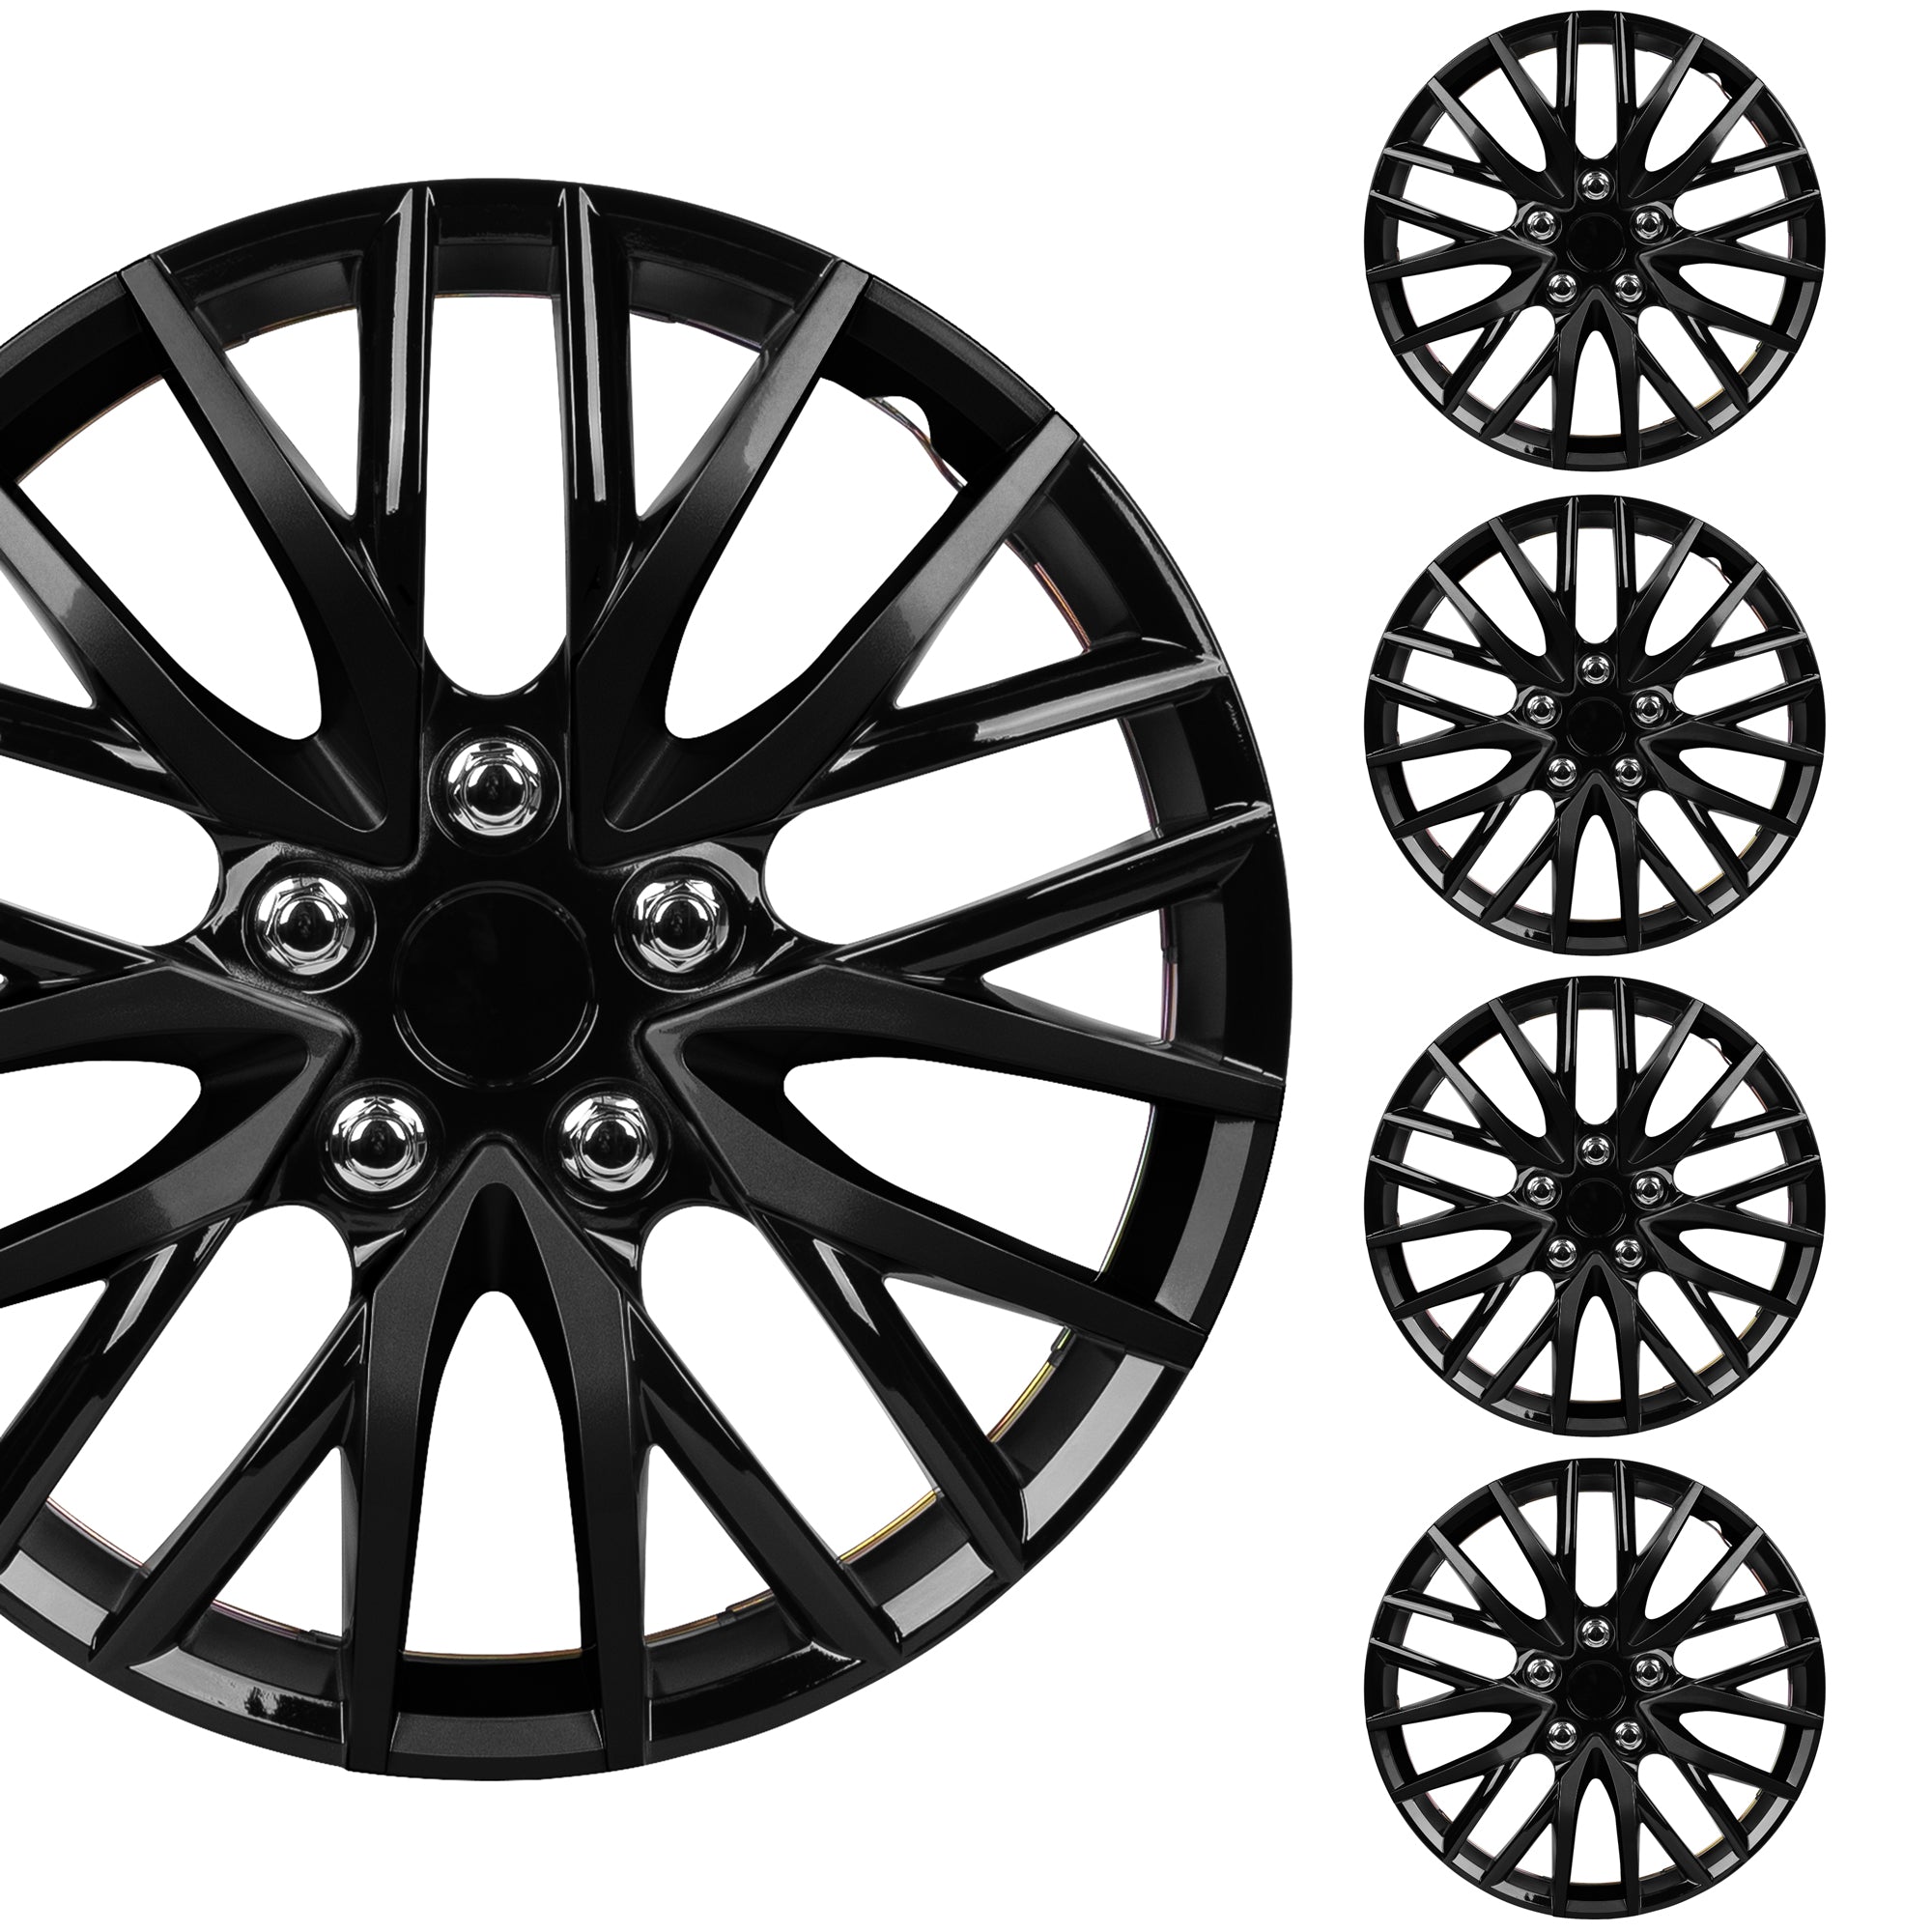 BDK (4-Pack) Premium Black Hubcaps 16" Wheel Rim Cover Hub Caps Style Replacement Snap On Car Truck SUV - 16 Inch Set